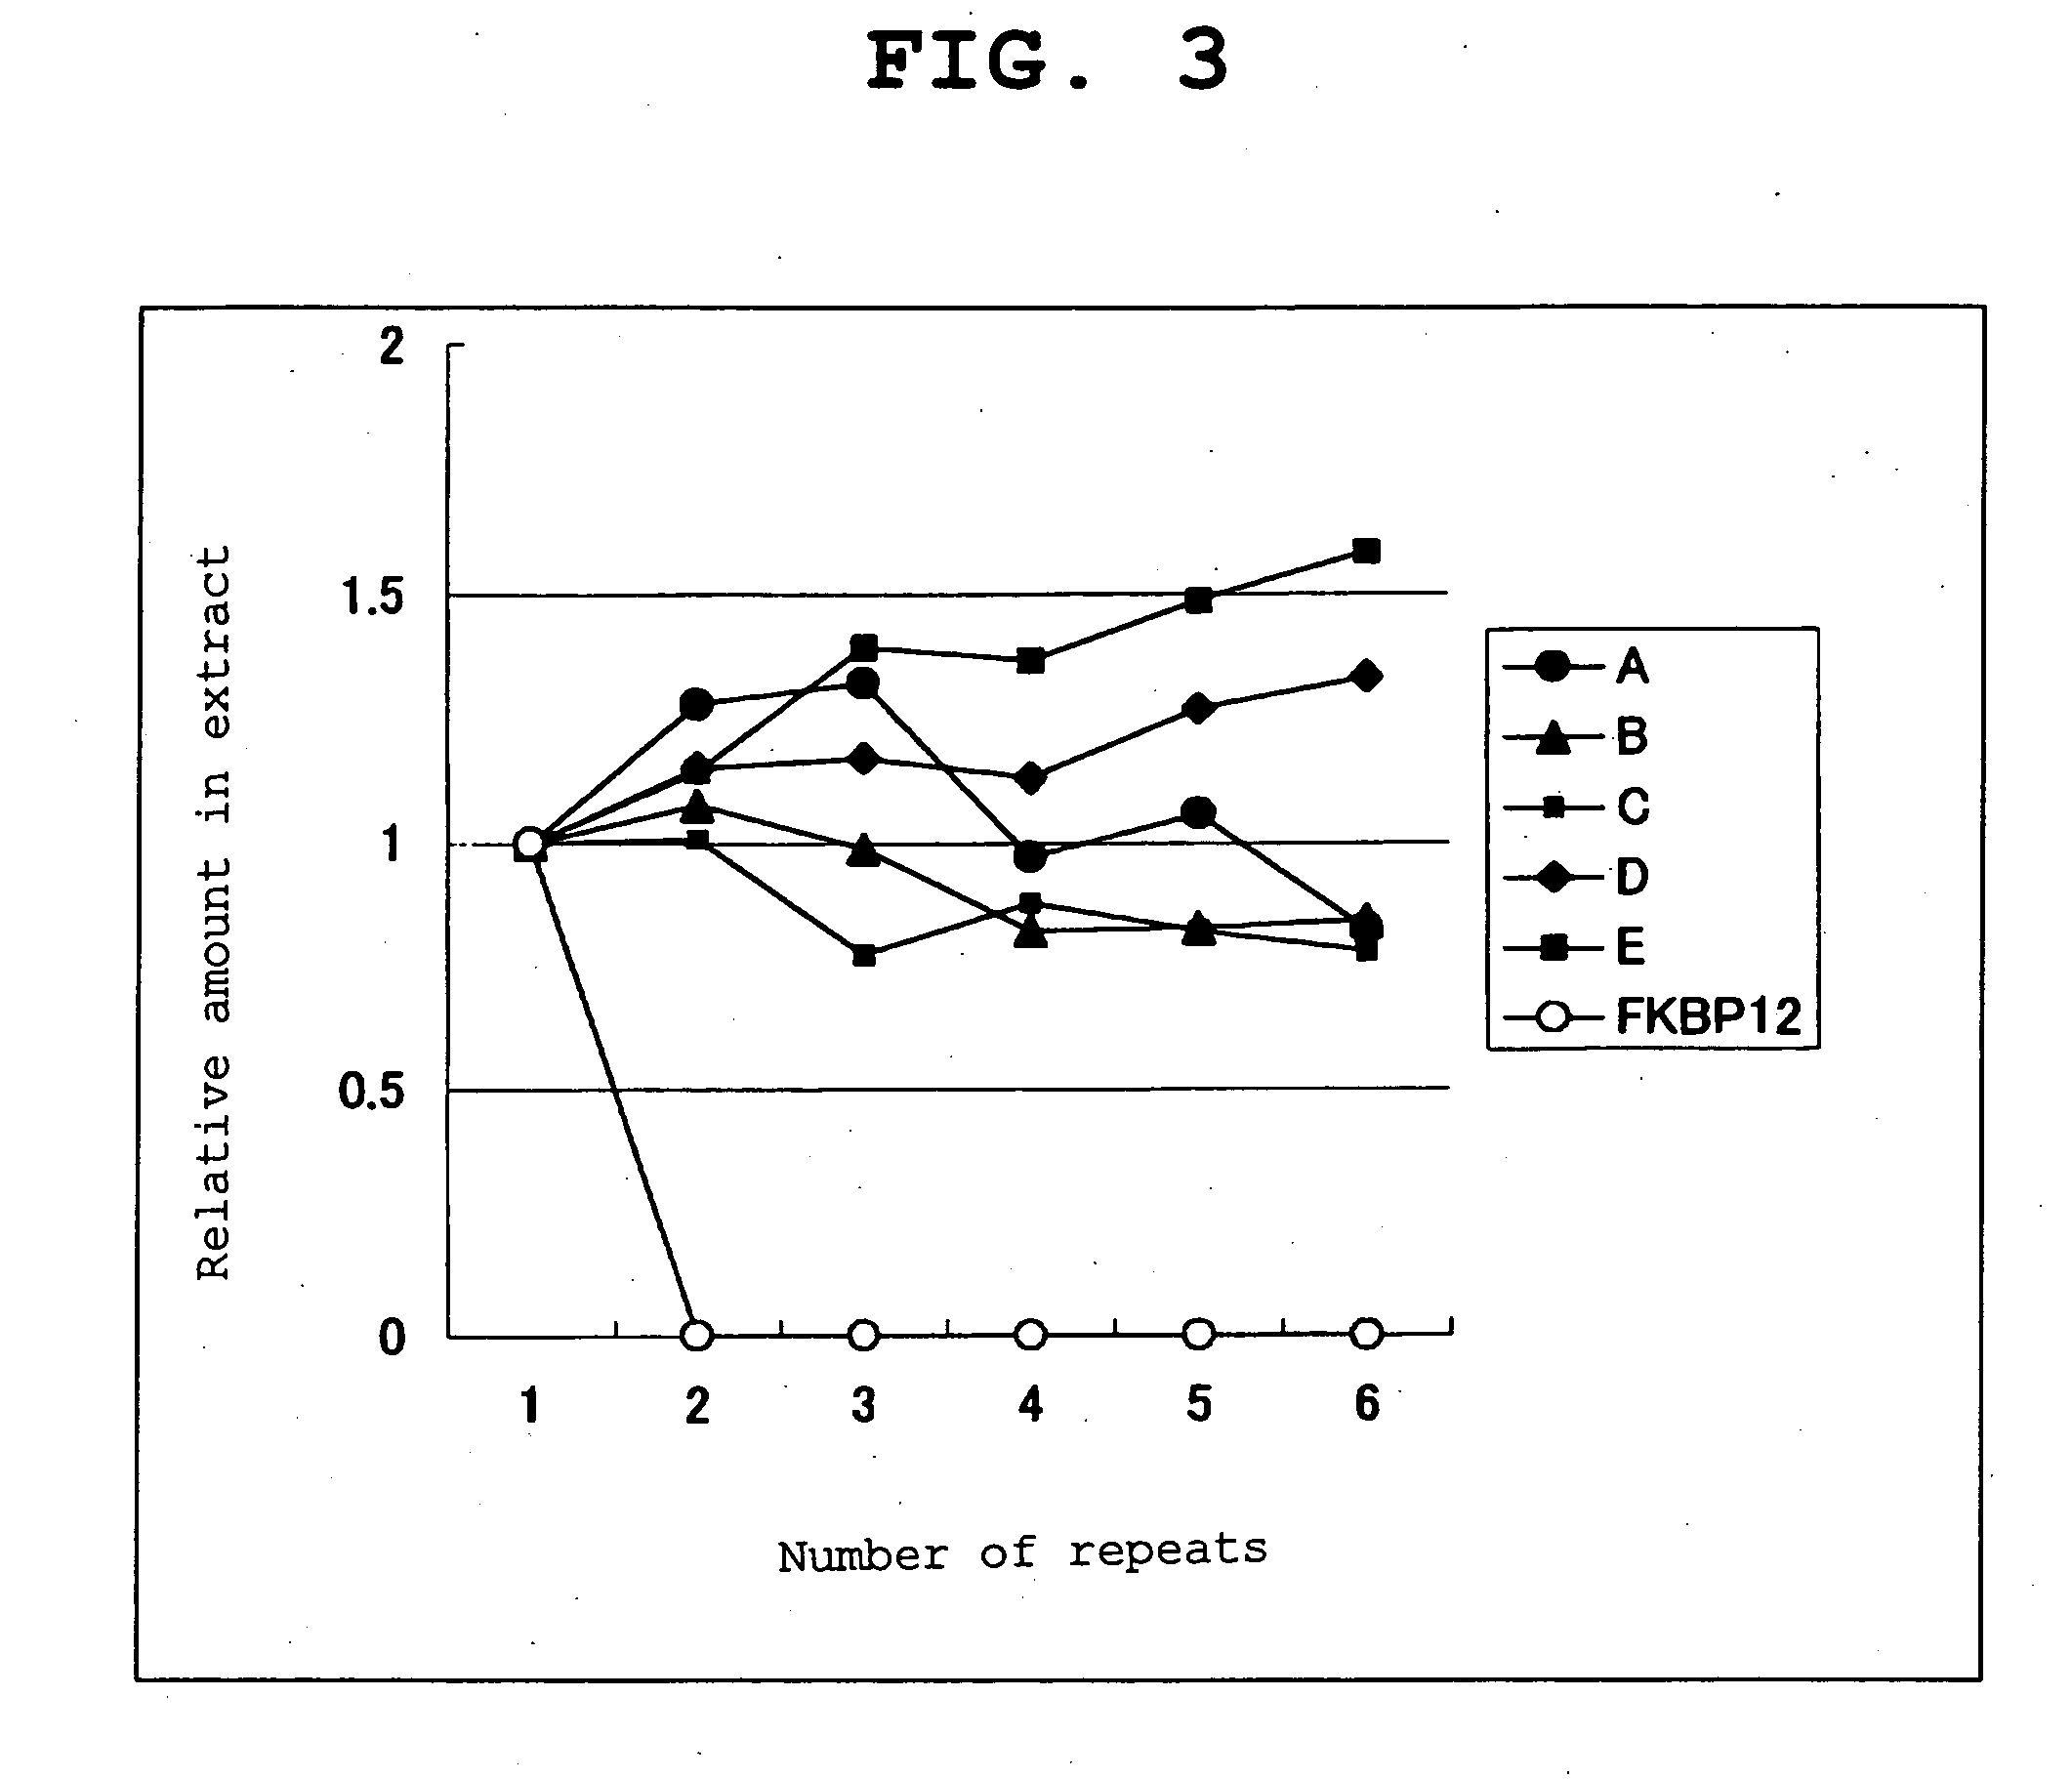 Method of calibrating ligand specificity